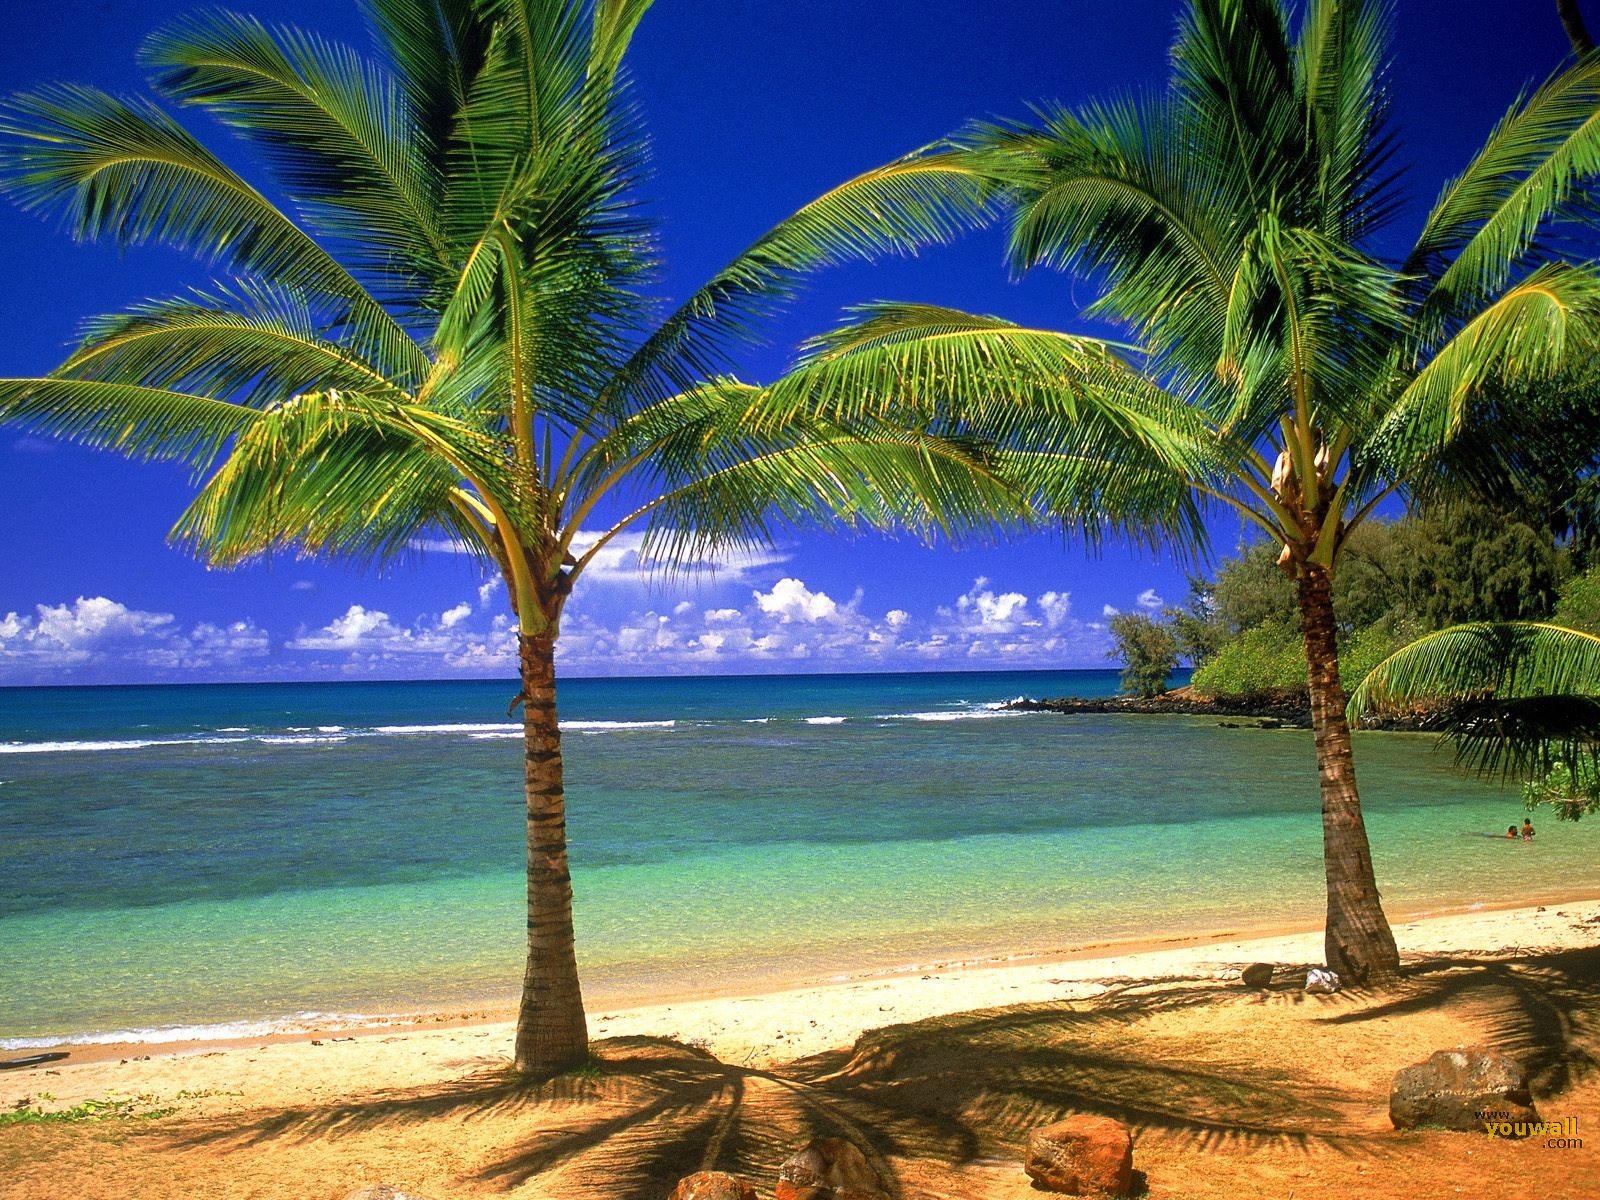  beach wallpaper 1600x1200 more wallpapers nature wallpapers sea and